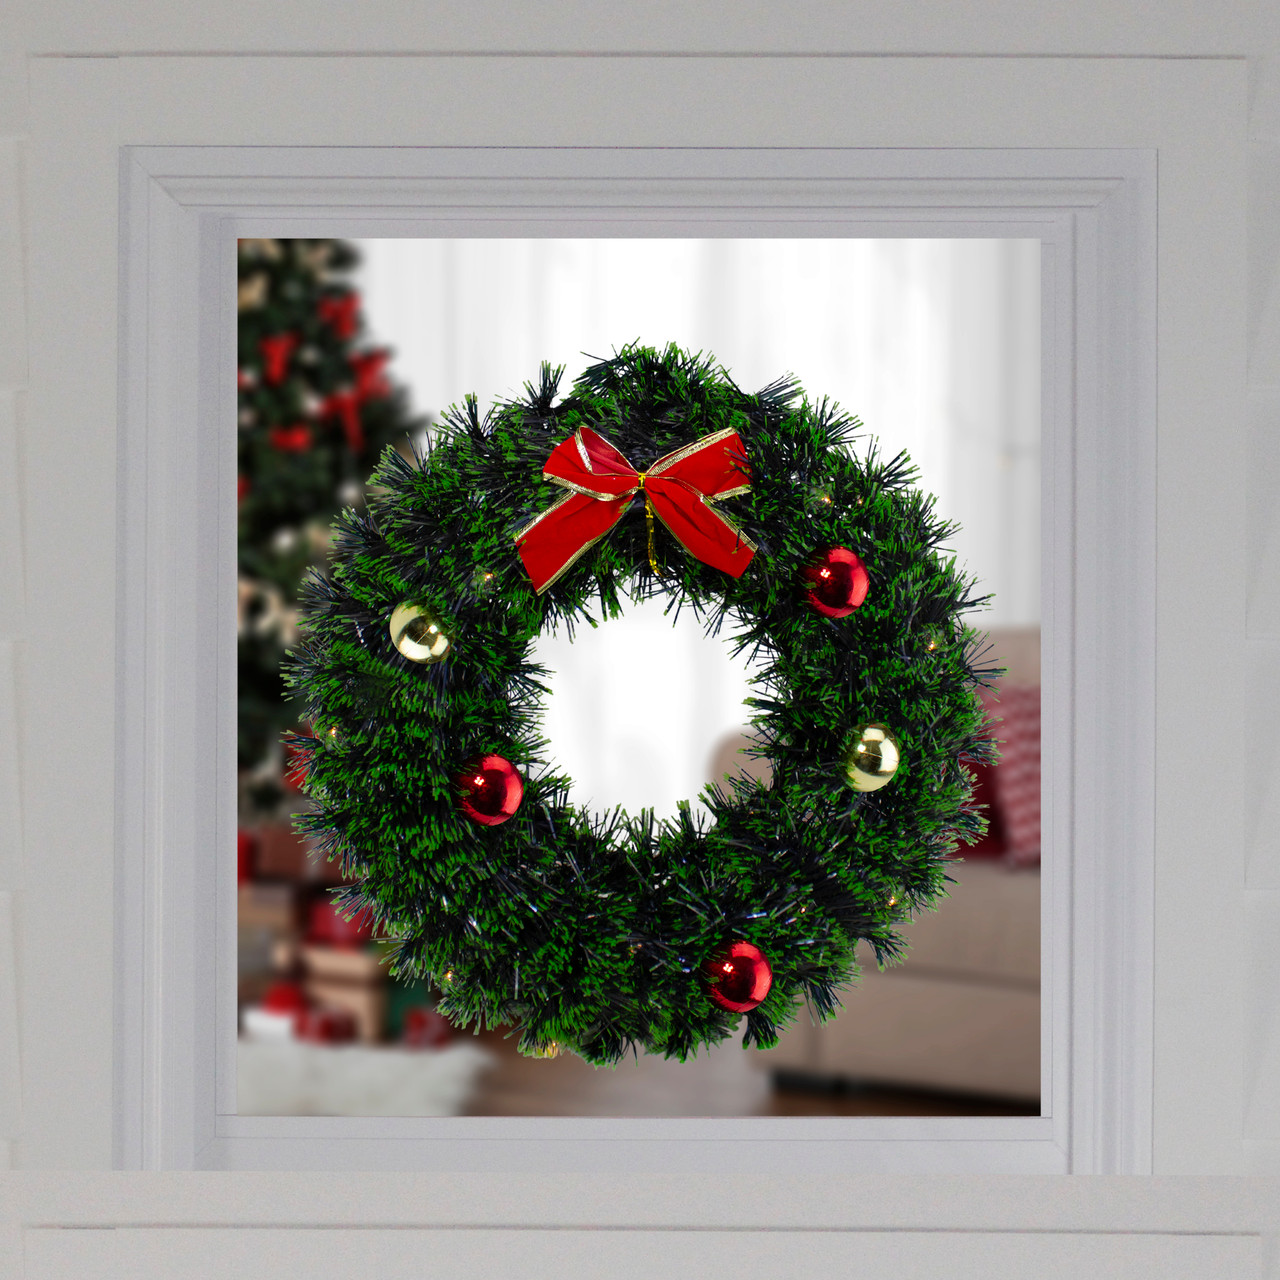 Red Heart Ornament & Tinsel Wreath 16in